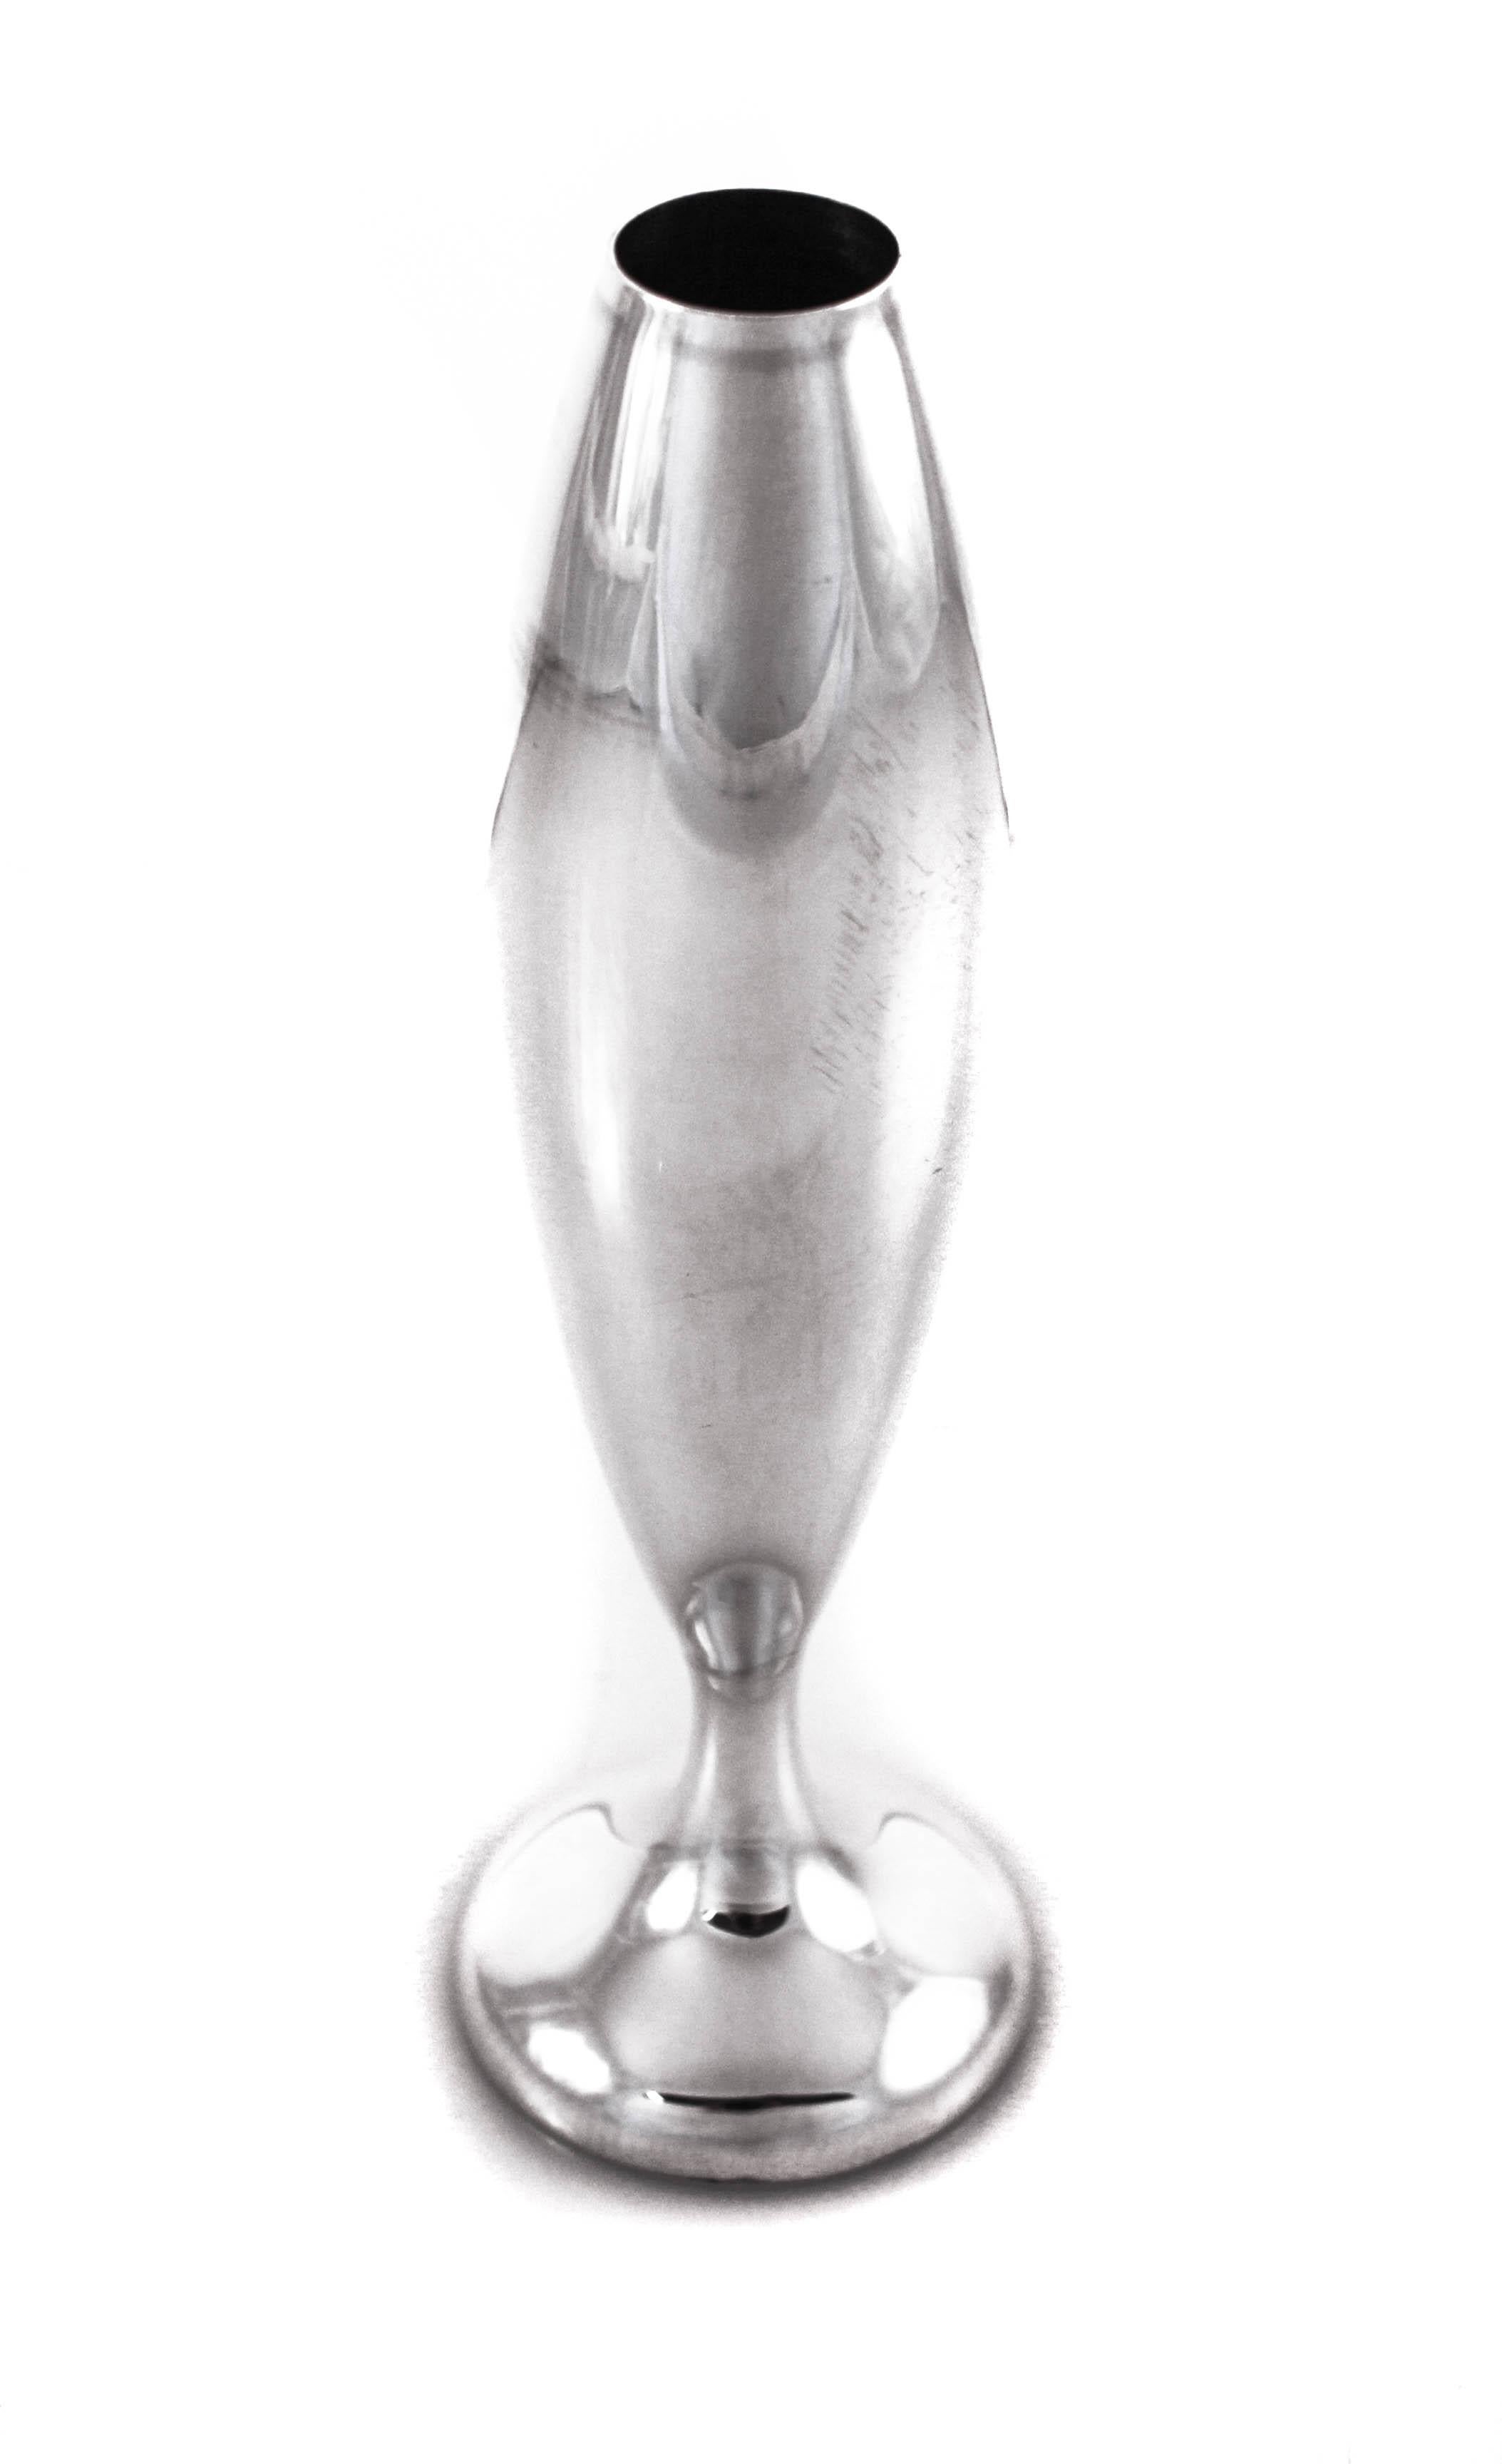 These sterling silver bud vases were made in Japan by the Toshikazu Silver Company. The Japanese are world renowned for being detail oriented and sticklers for precision. These vases are simple in detail and do not have ornamentation but their very